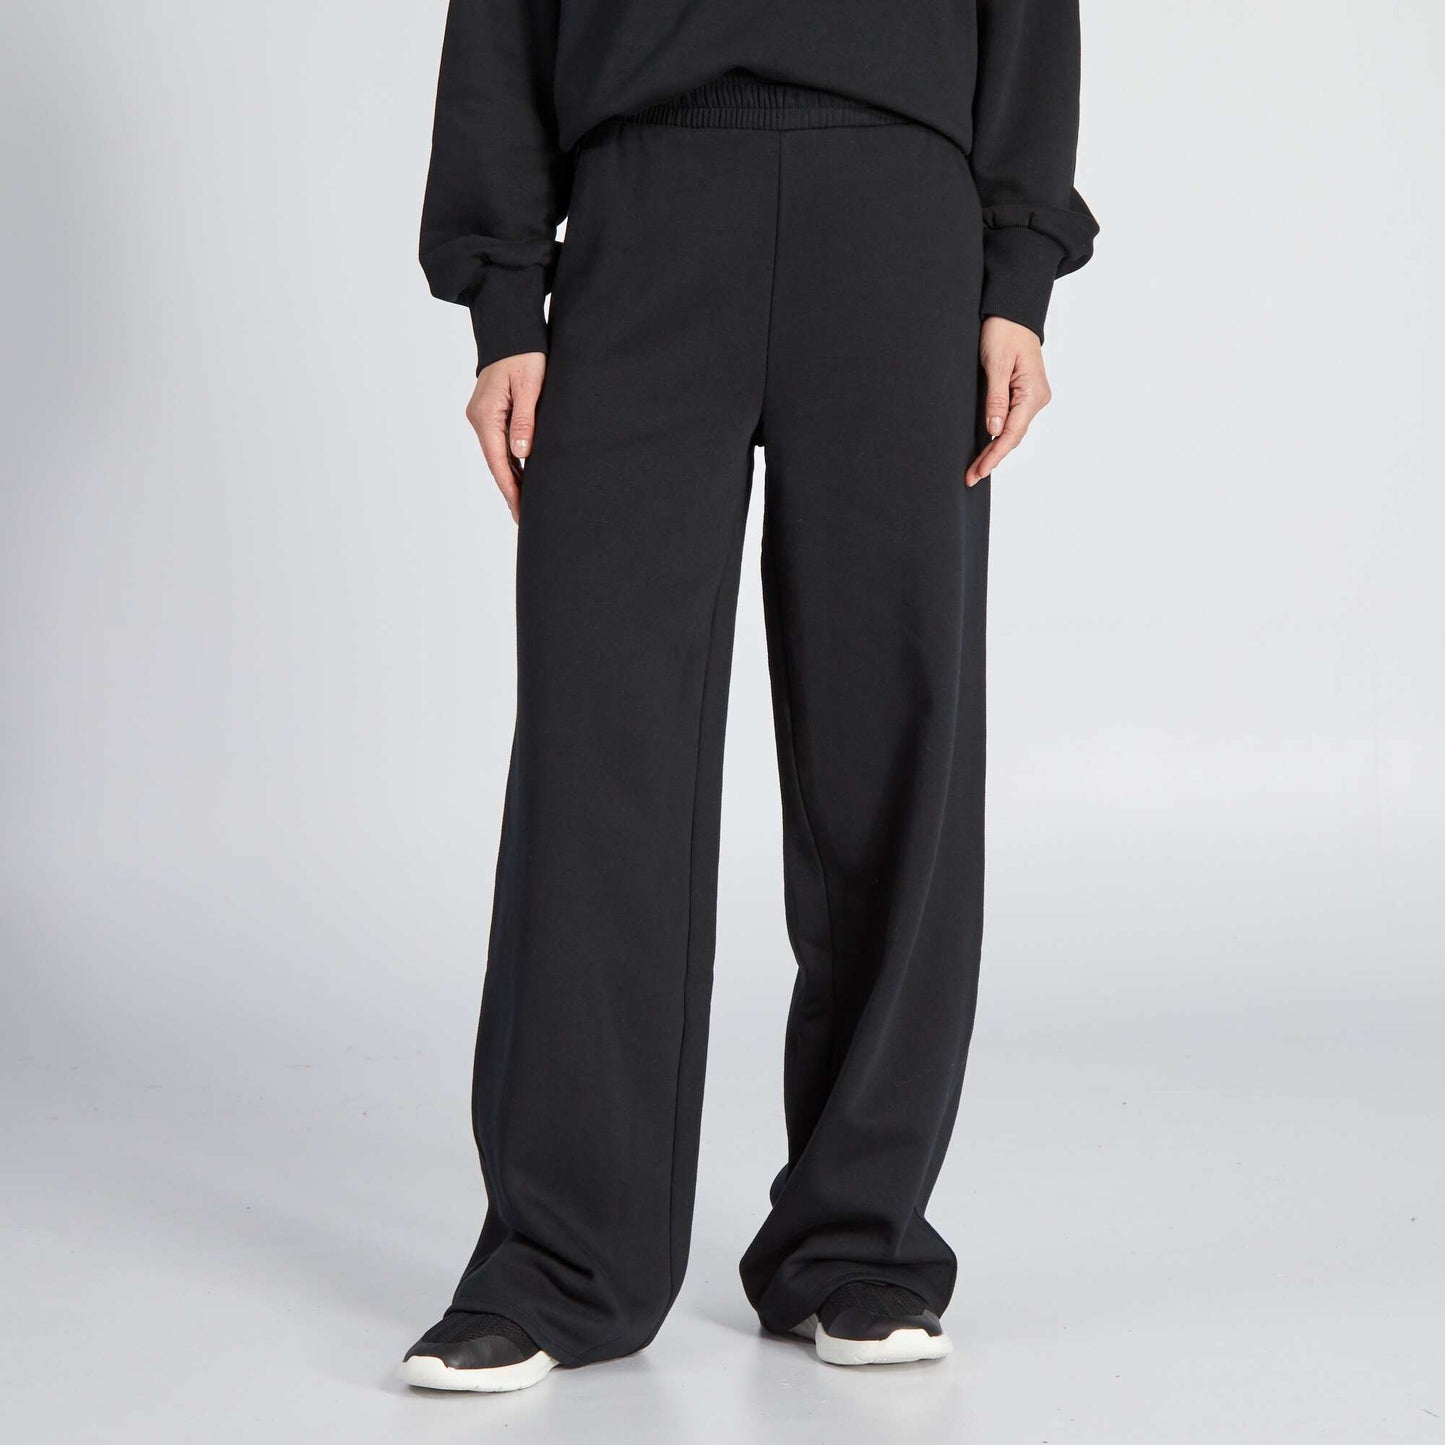 Loose-fitting joggers black